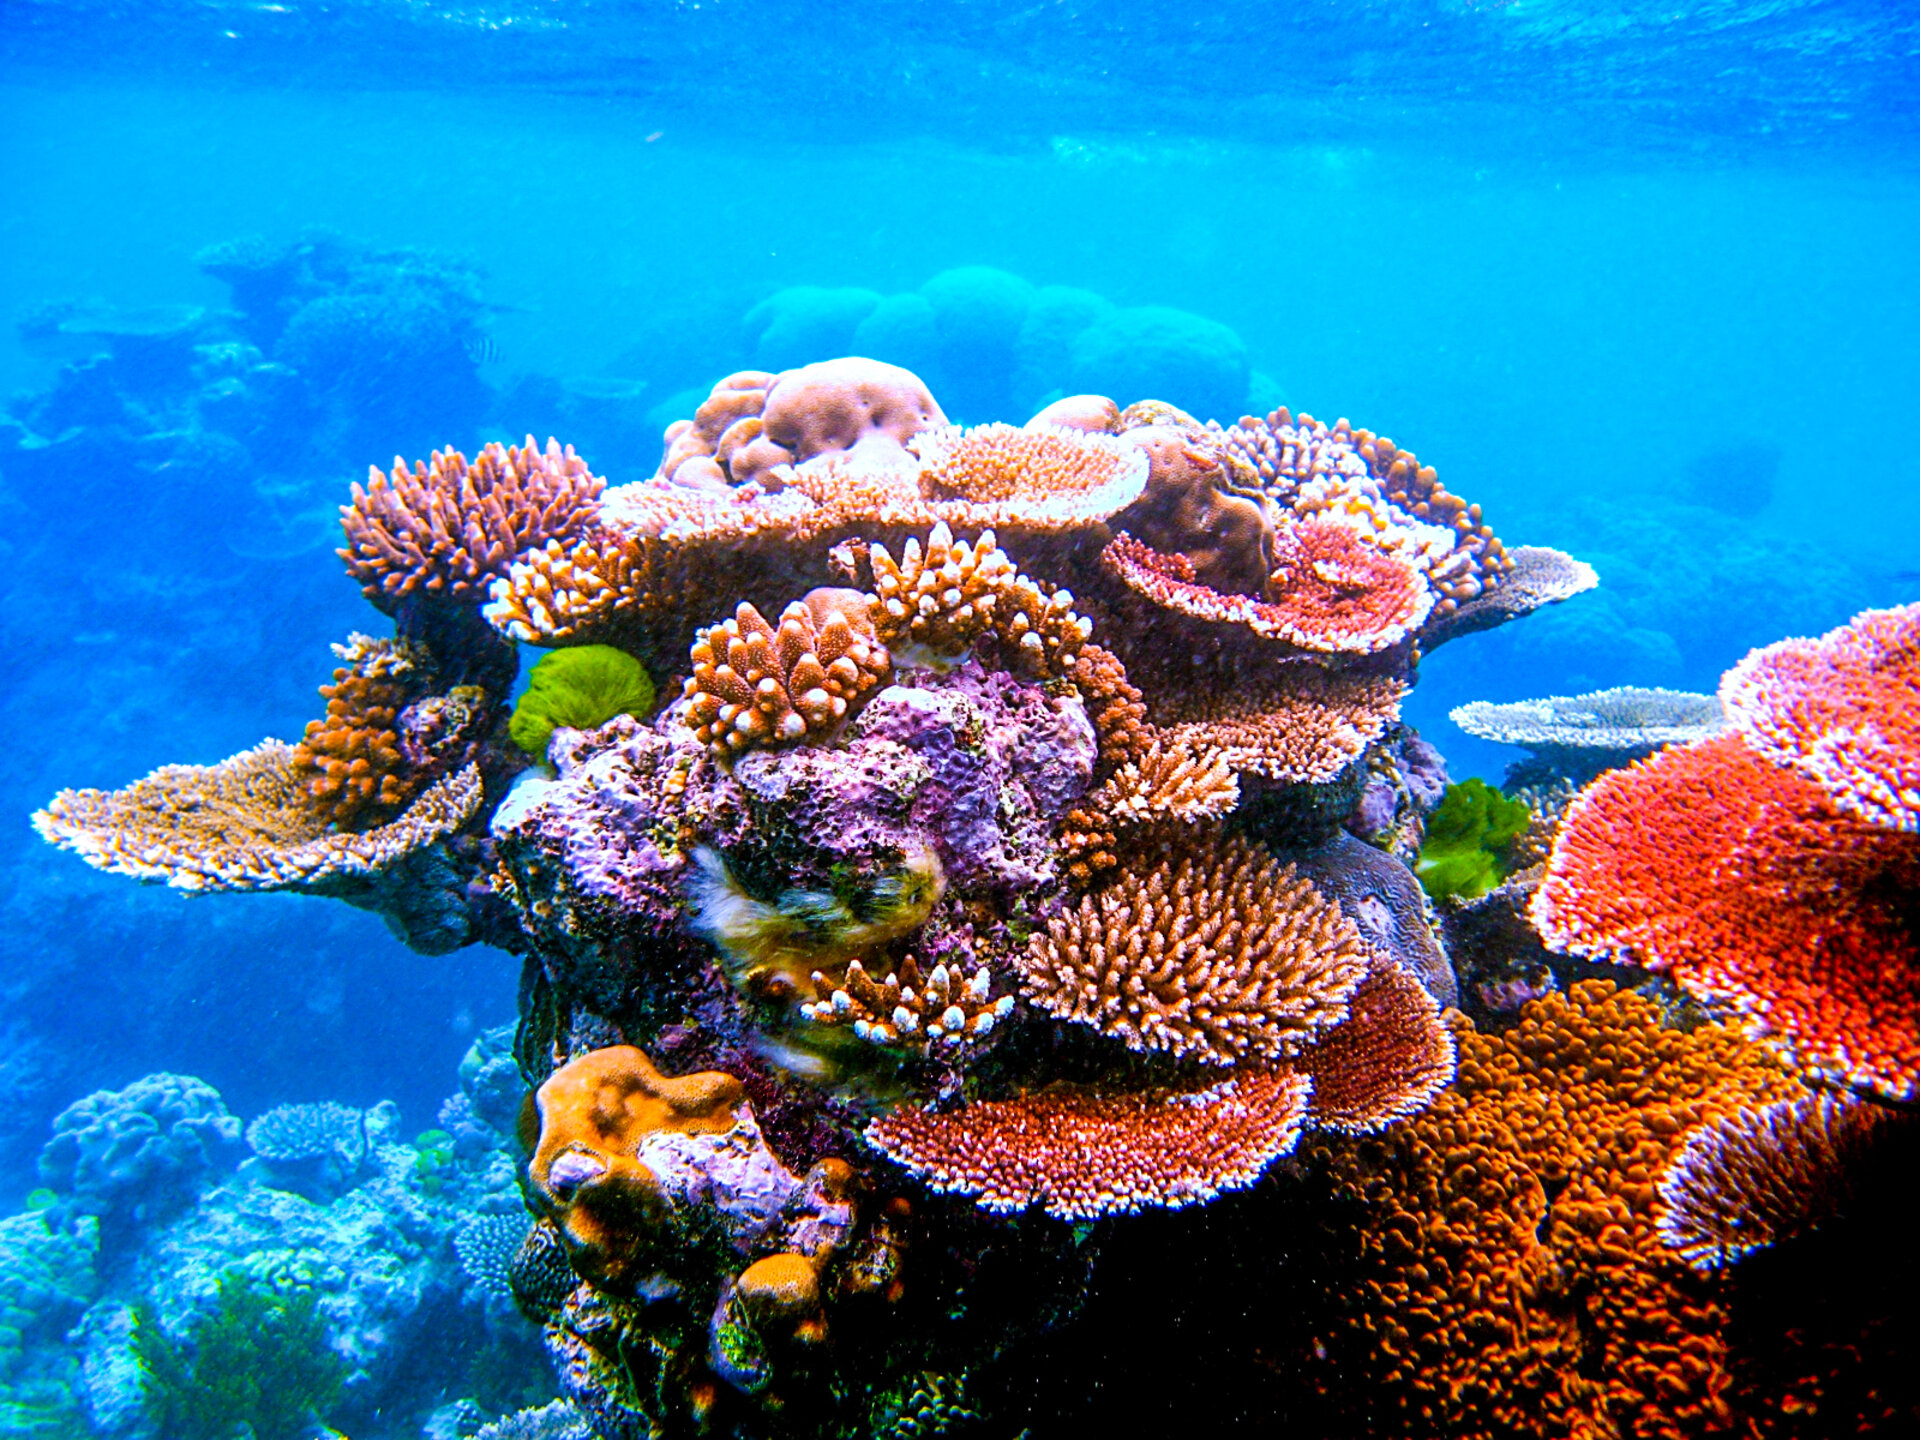 The Great Barrier Reef is home to hundreds of types of coral